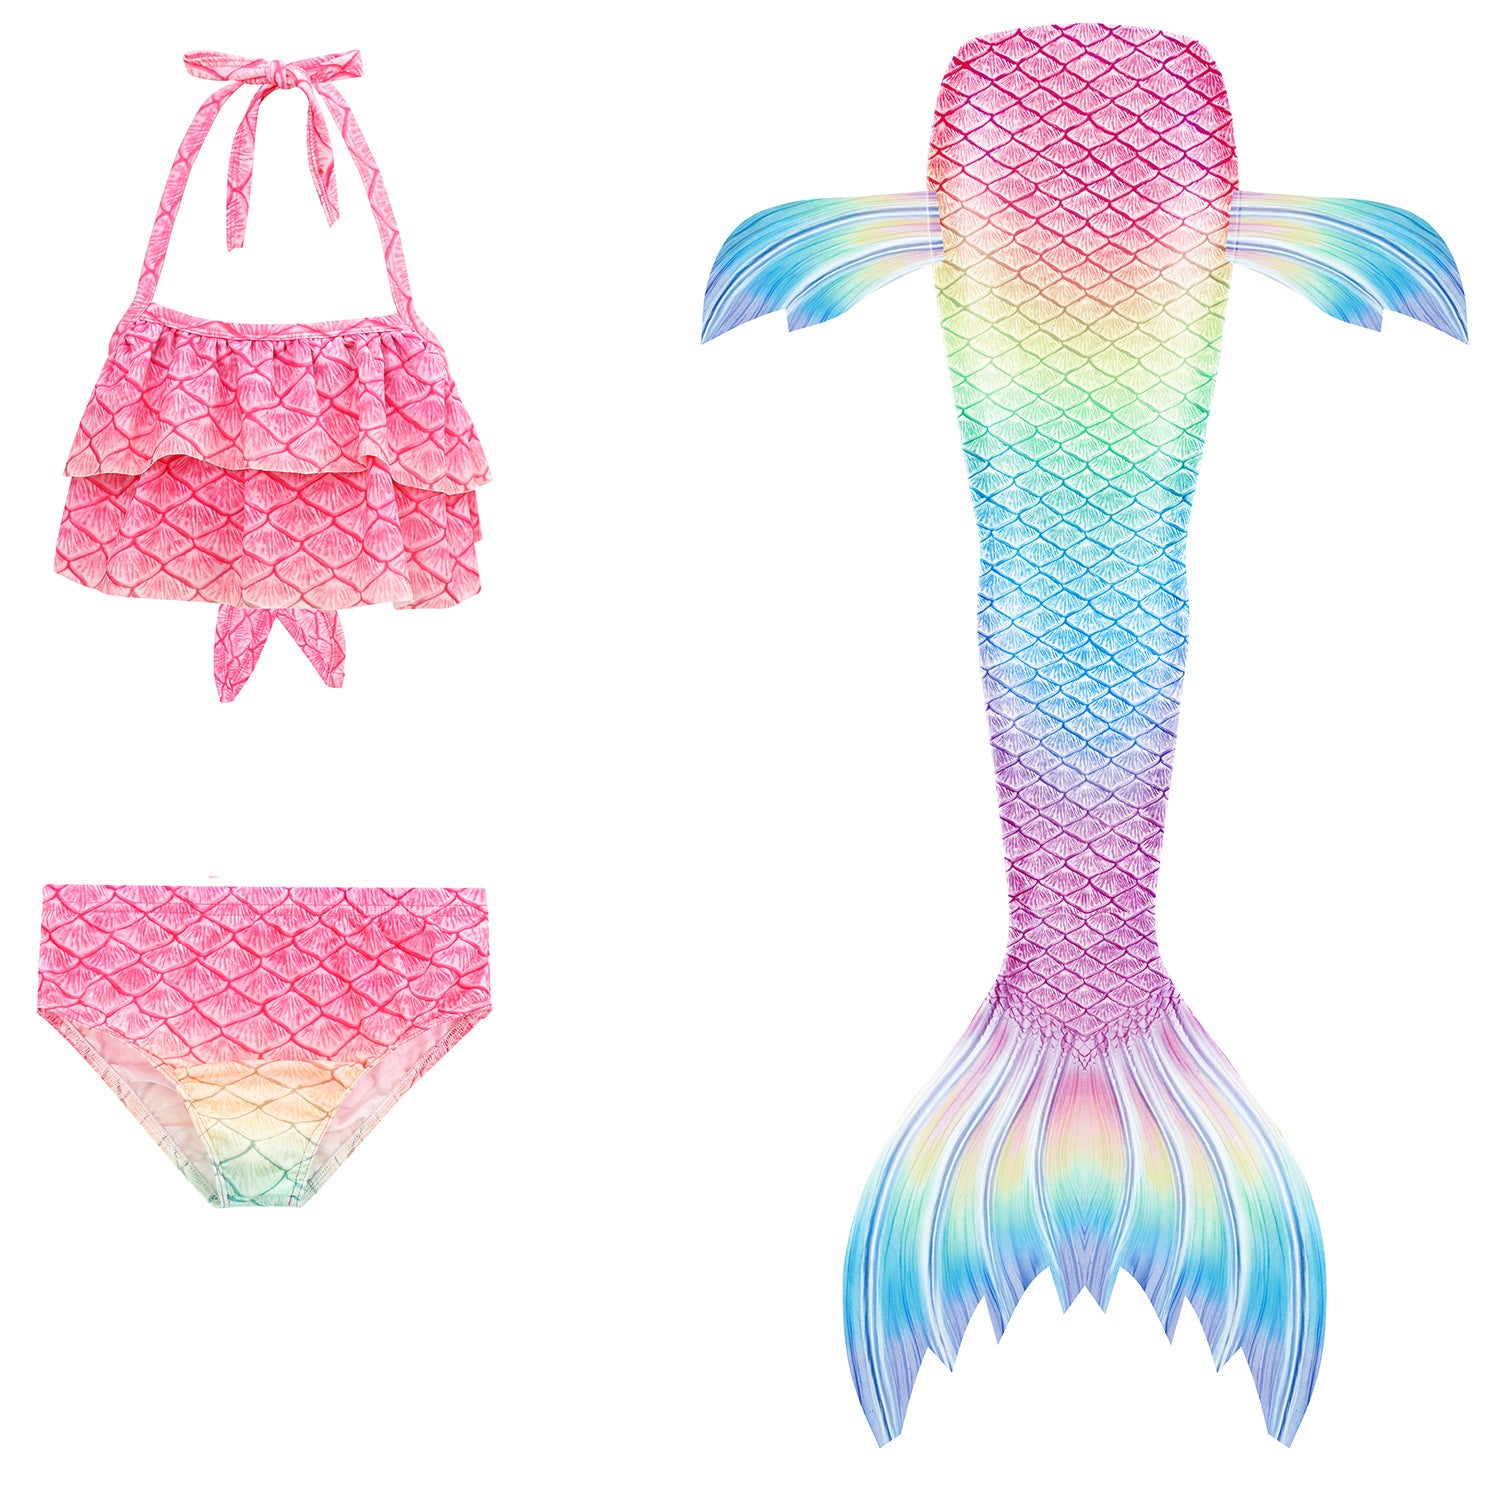 Very cute Mermaid Tail with soft Rainbow colours with added dorsal fins. Complete with matching, larger - offering more coverage, frill halter-neck bikini. Part of our luxury range, this tail has a high quality side zip. Mini Mermaid Tails